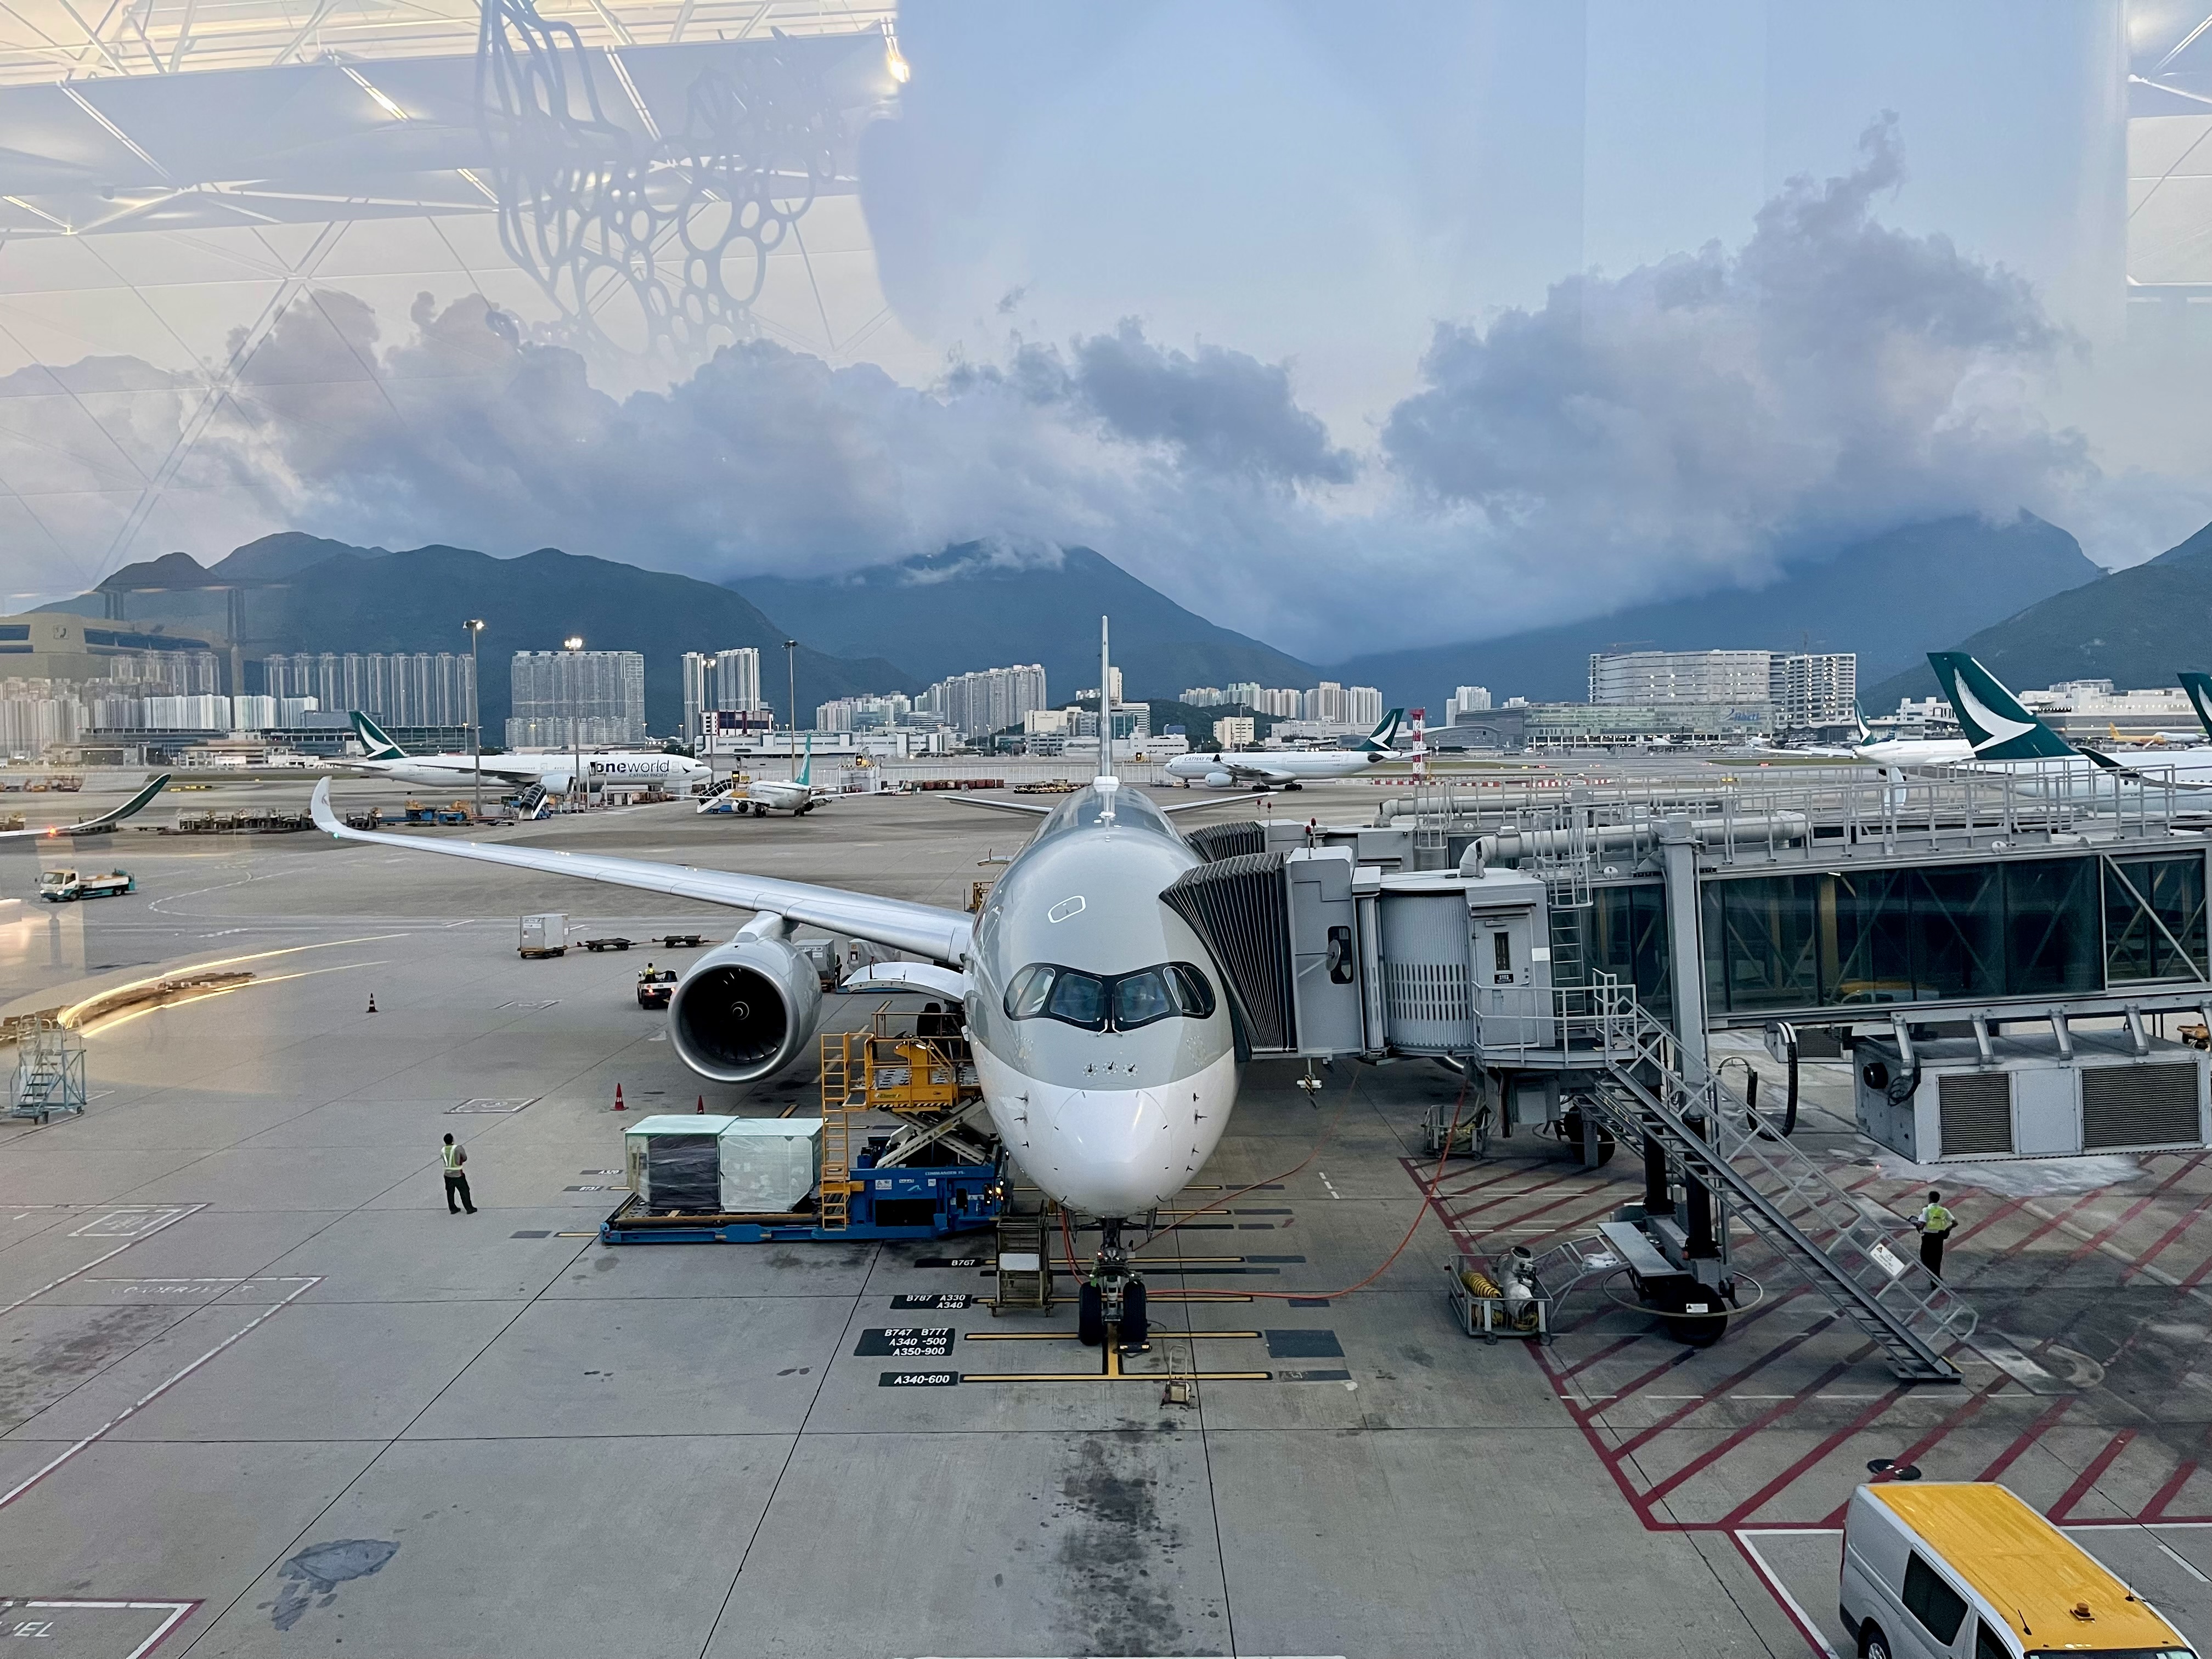 Masked up, looking out the window at my airplane at HKG